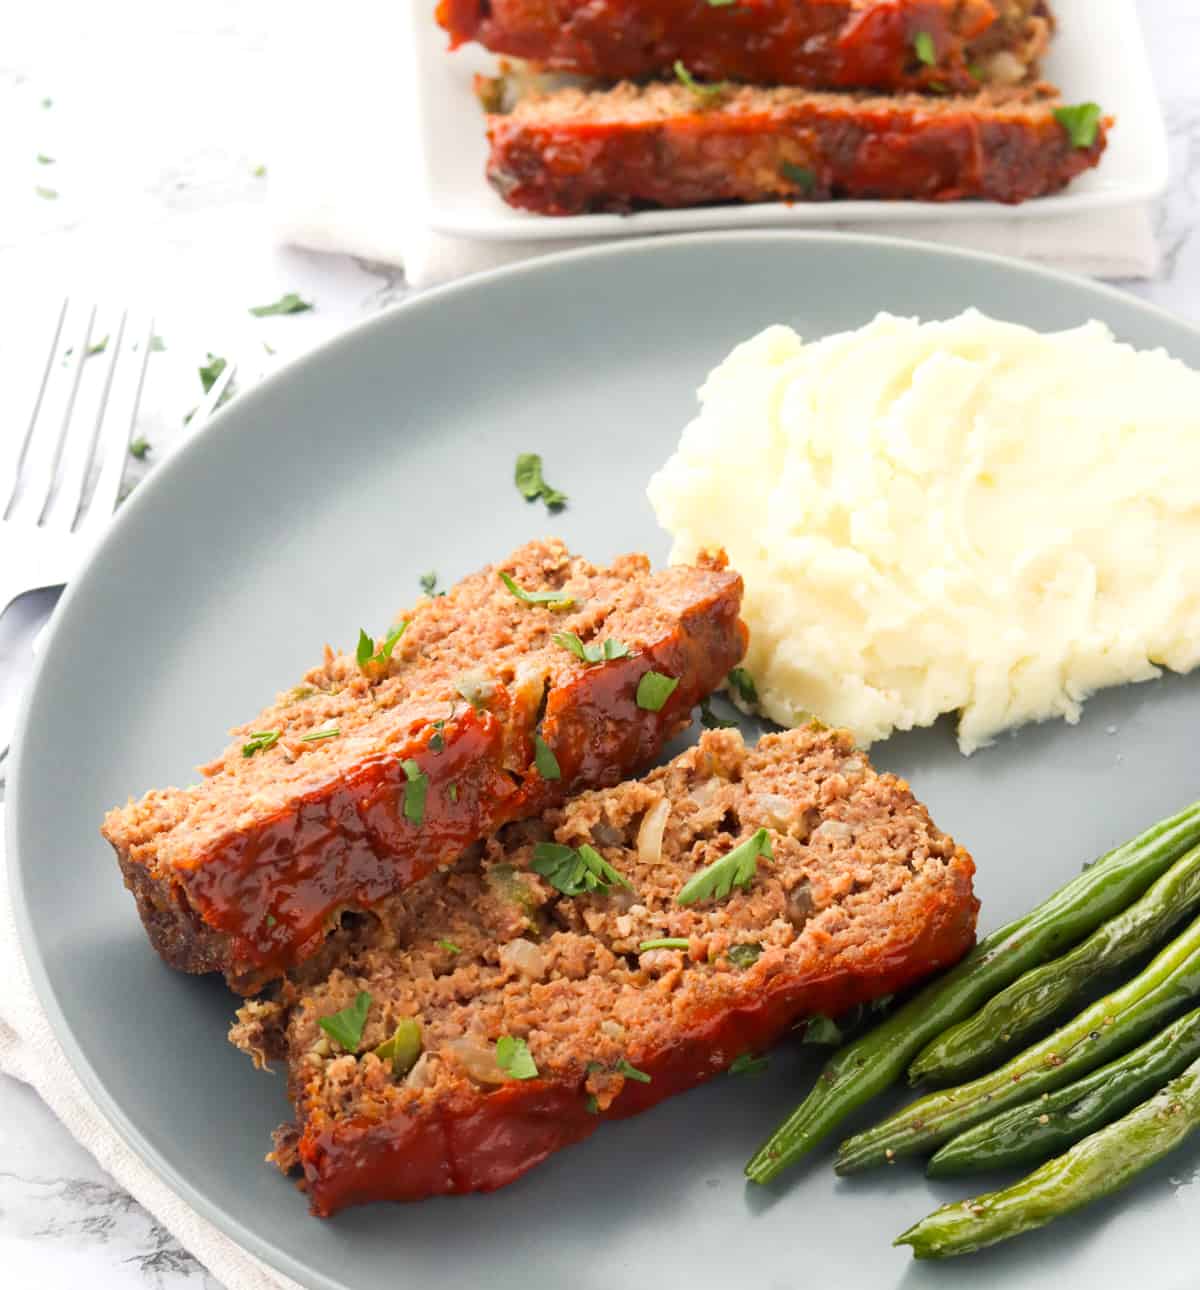 Enjoy meatloaf with roasted beans and mashed potatoes